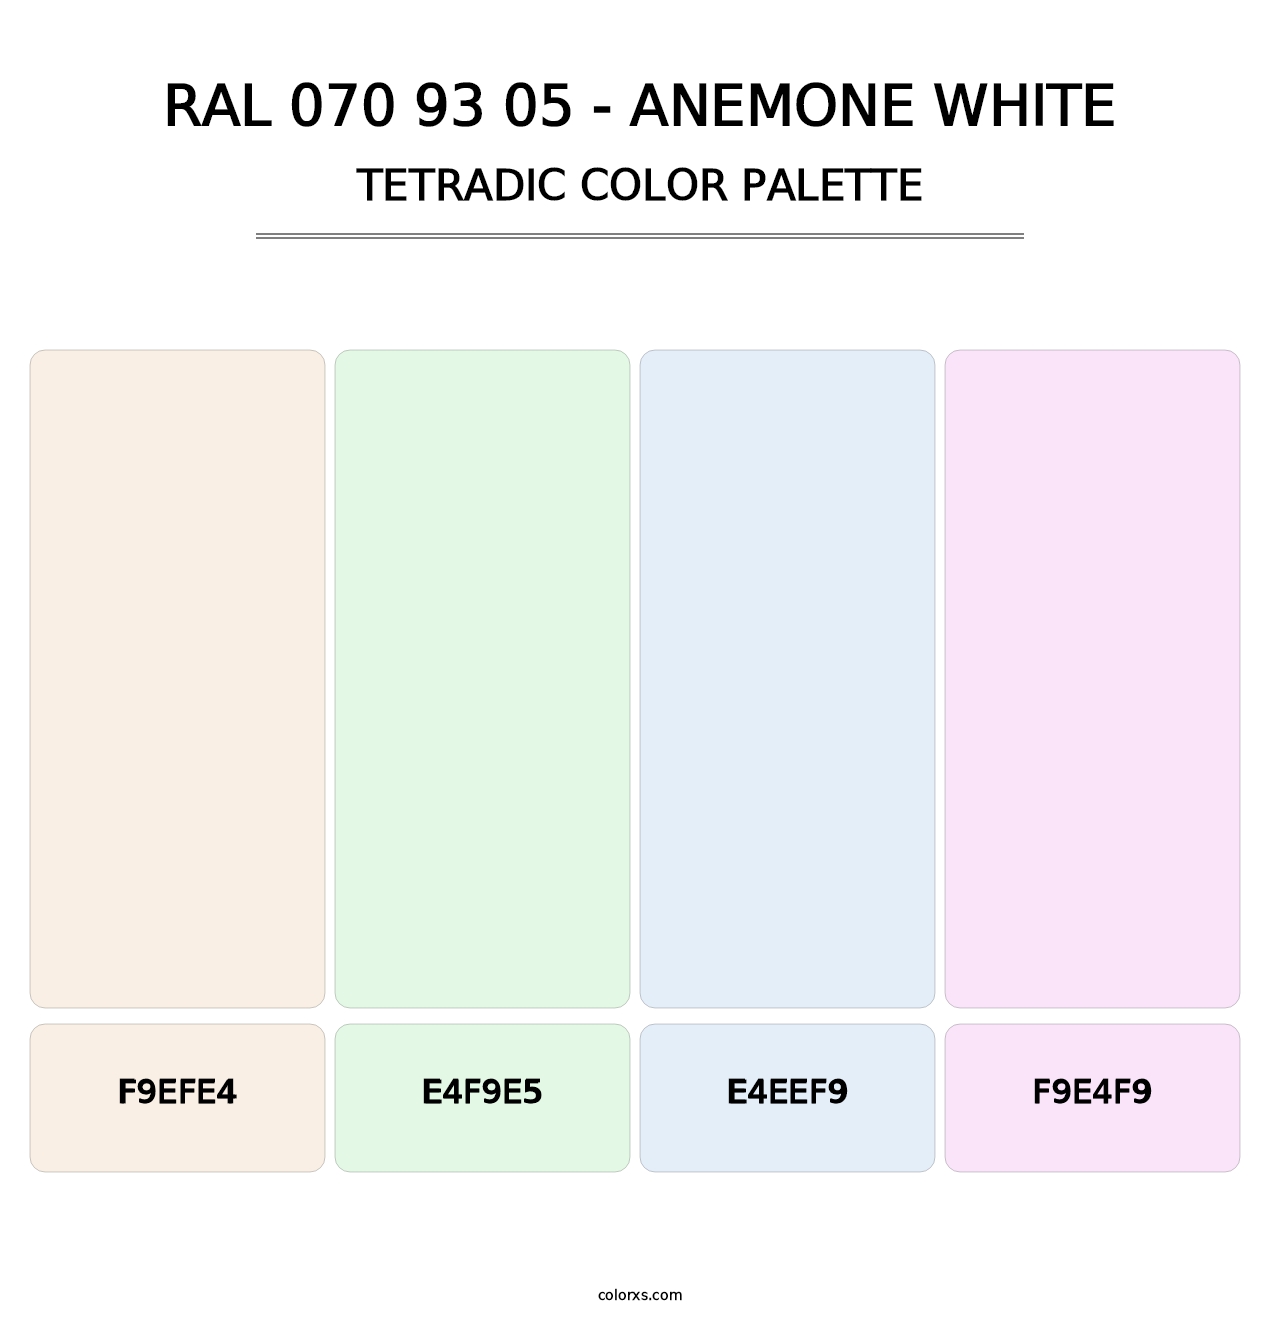 RAL 070 93 05 - Anemone White - Tetradic Color Palette